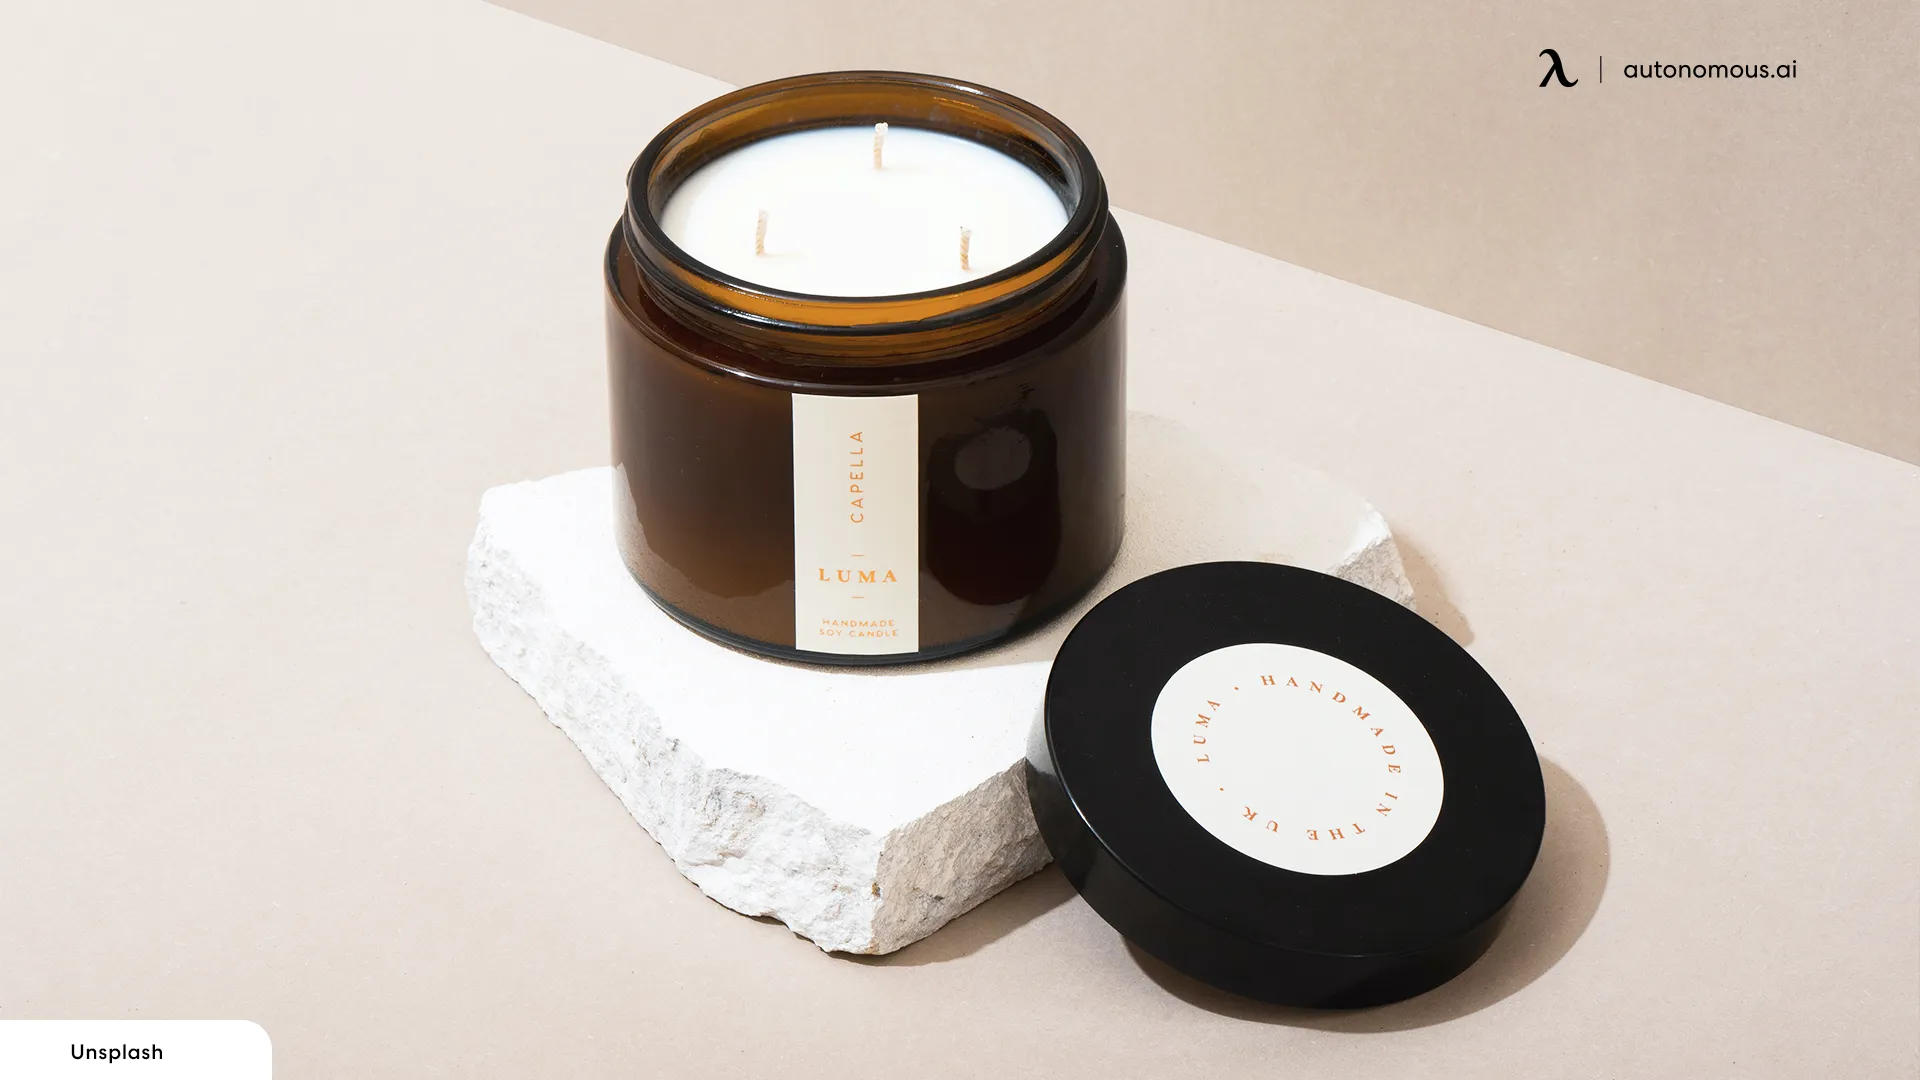 Scented Candle Gift Set